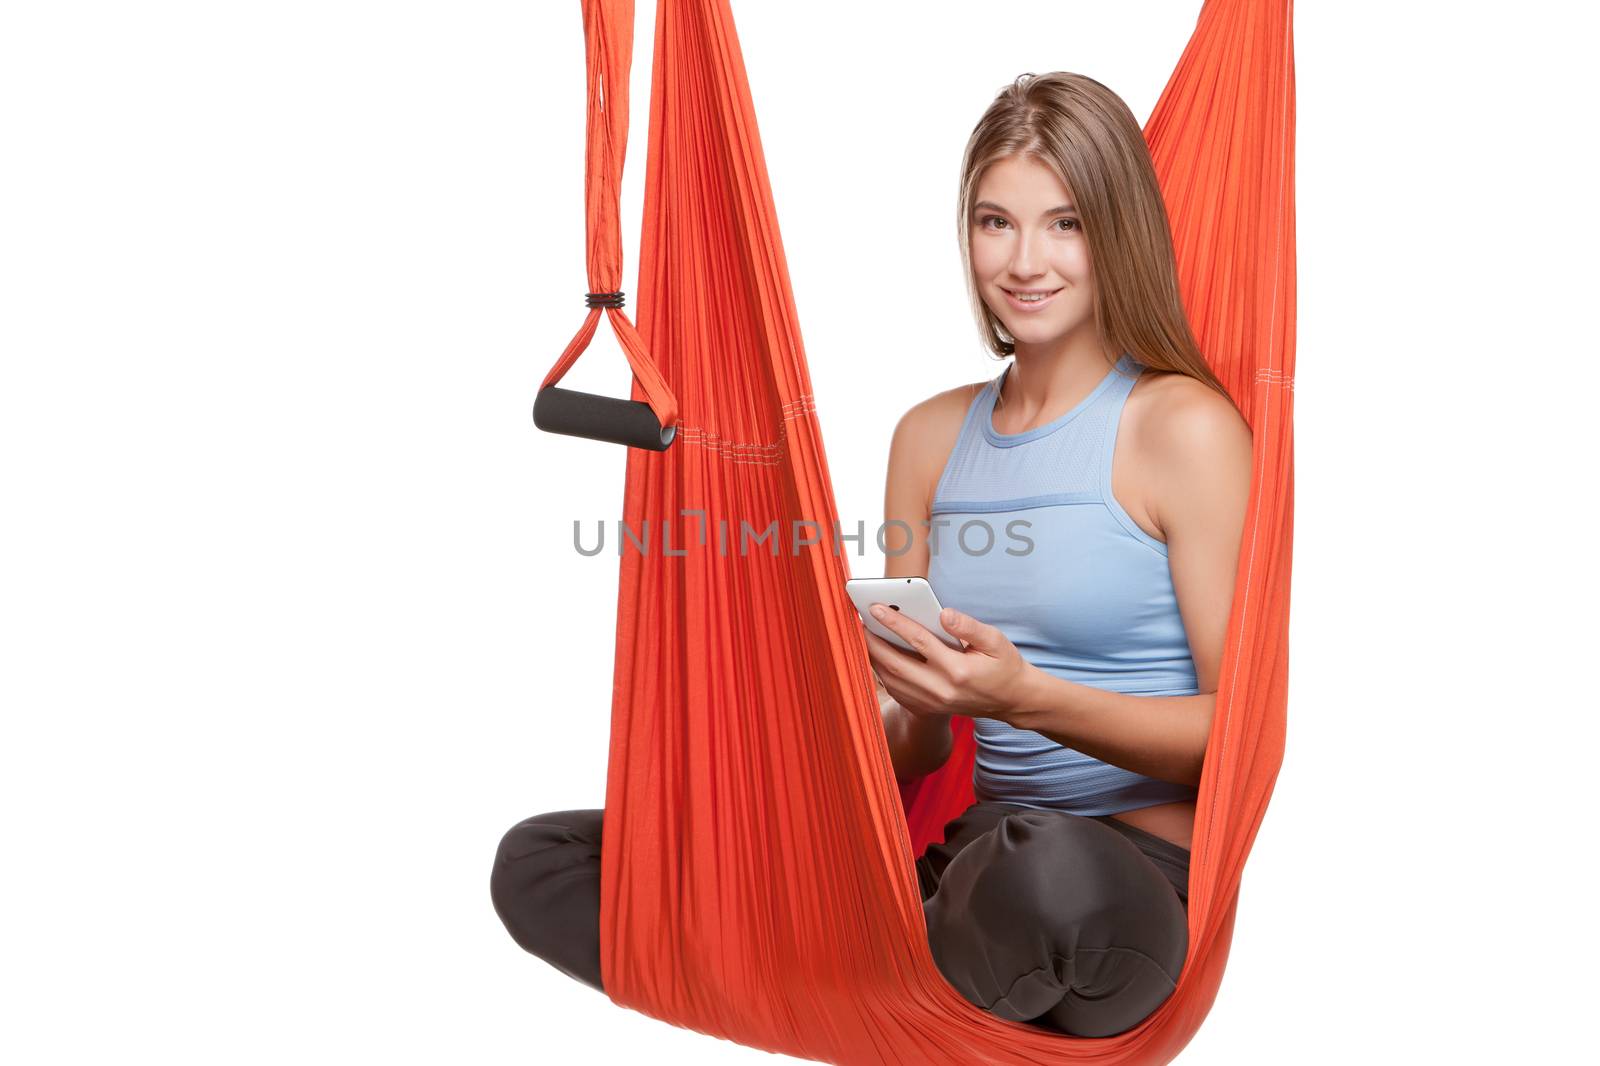 Young woman sitting in red hammock for anti-gravity aerial yoga with phone on a white background.